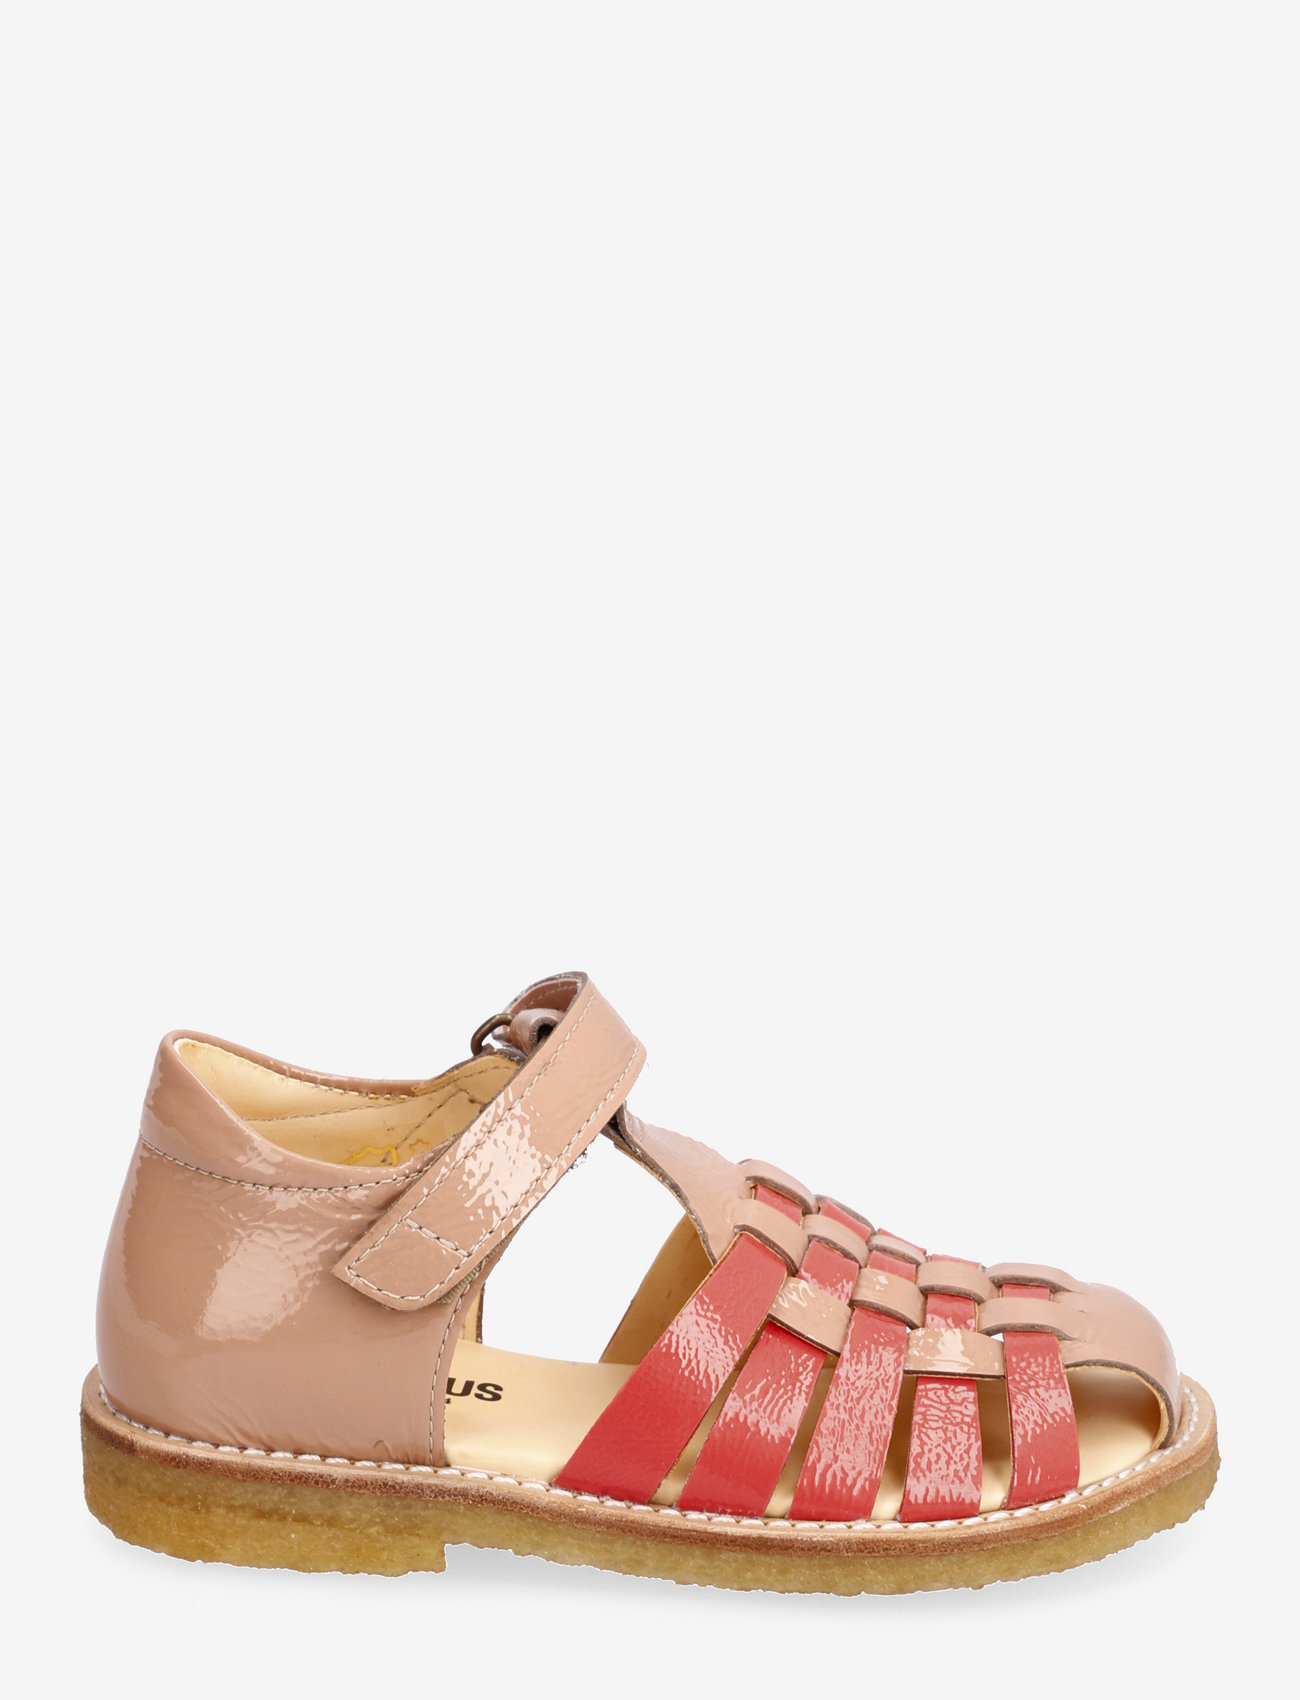 ANGULUS - Sandals - flat - closed toe - - sommarfynd - 1305/1318 d. peach/coral - 1